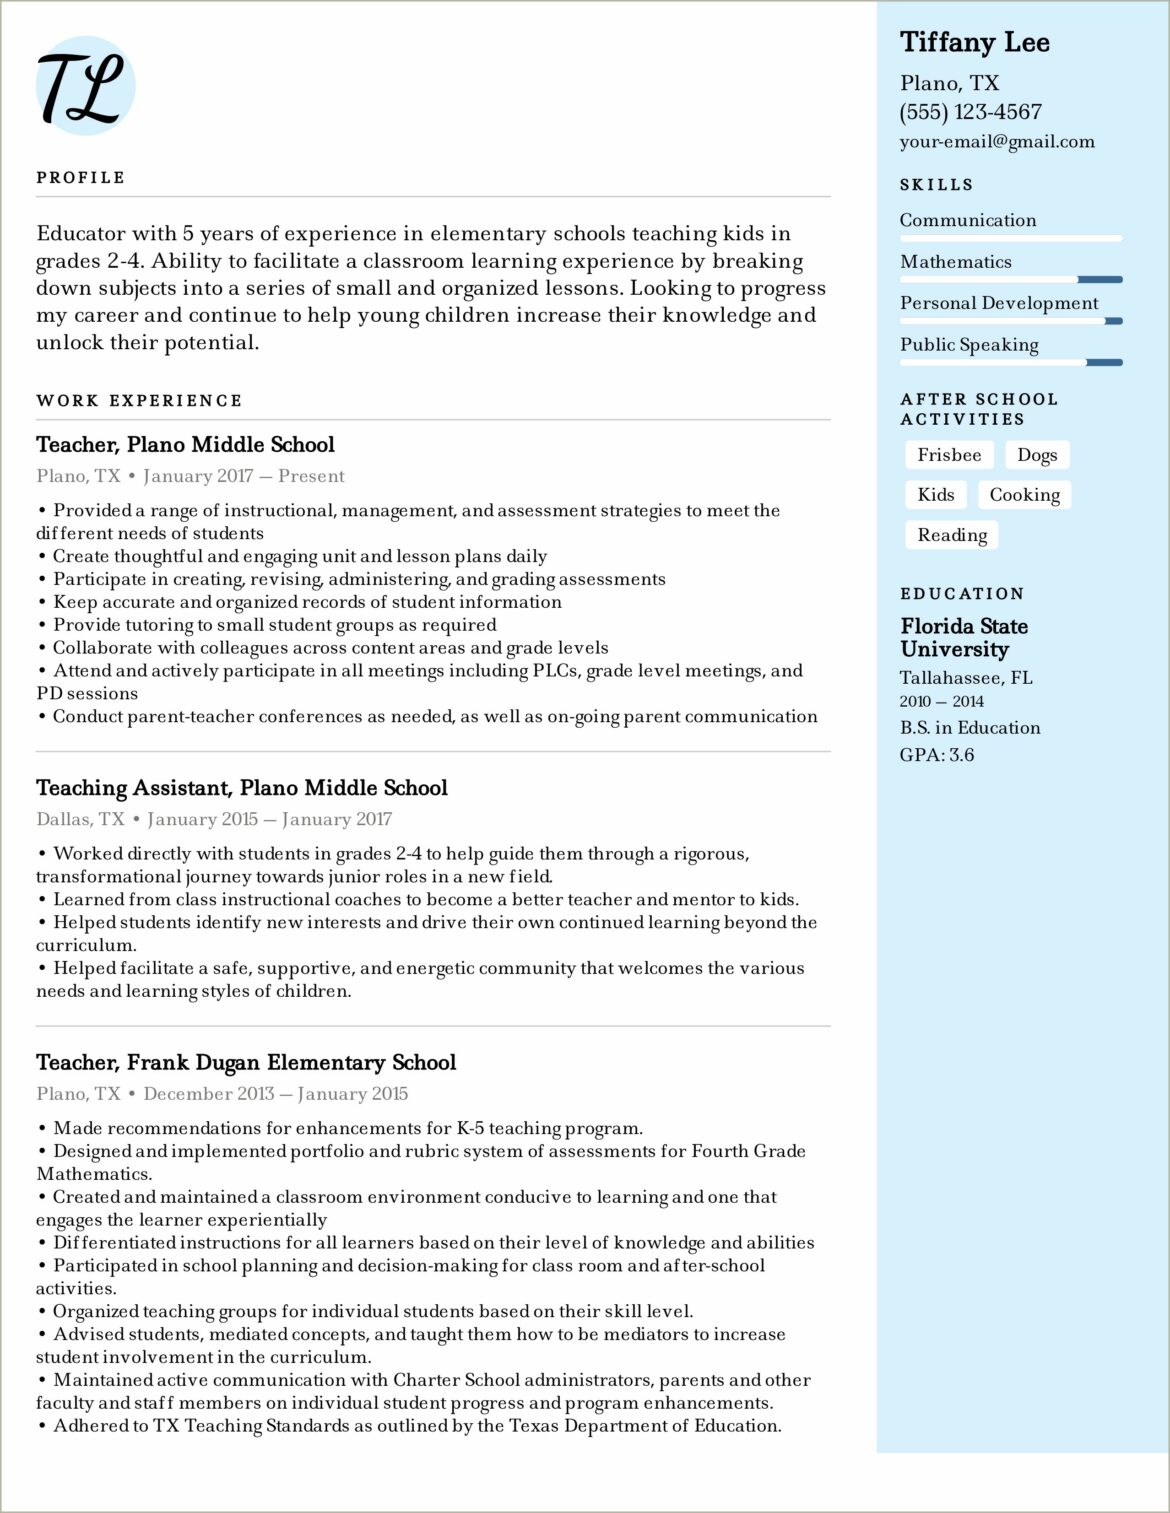 Sample Resume With Education In Progress